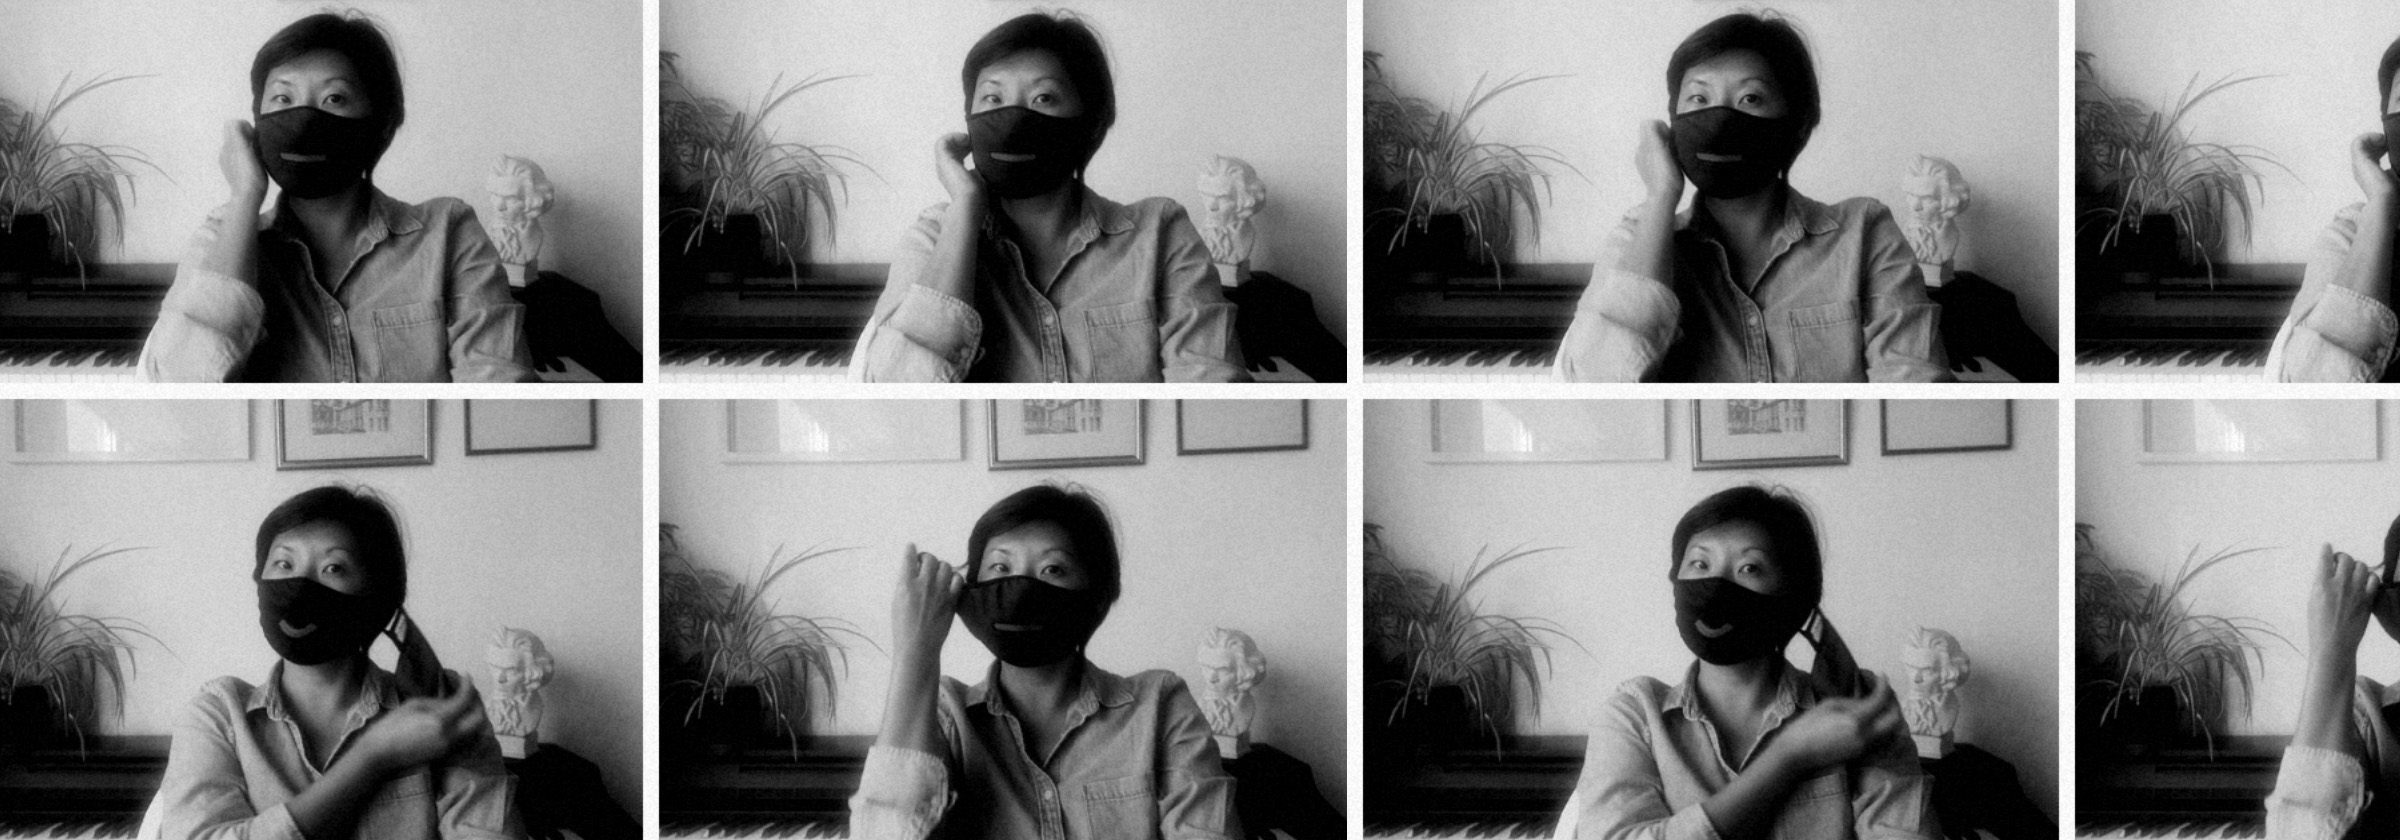 6 photos of Beatrix Ong MBE wearing a face mask